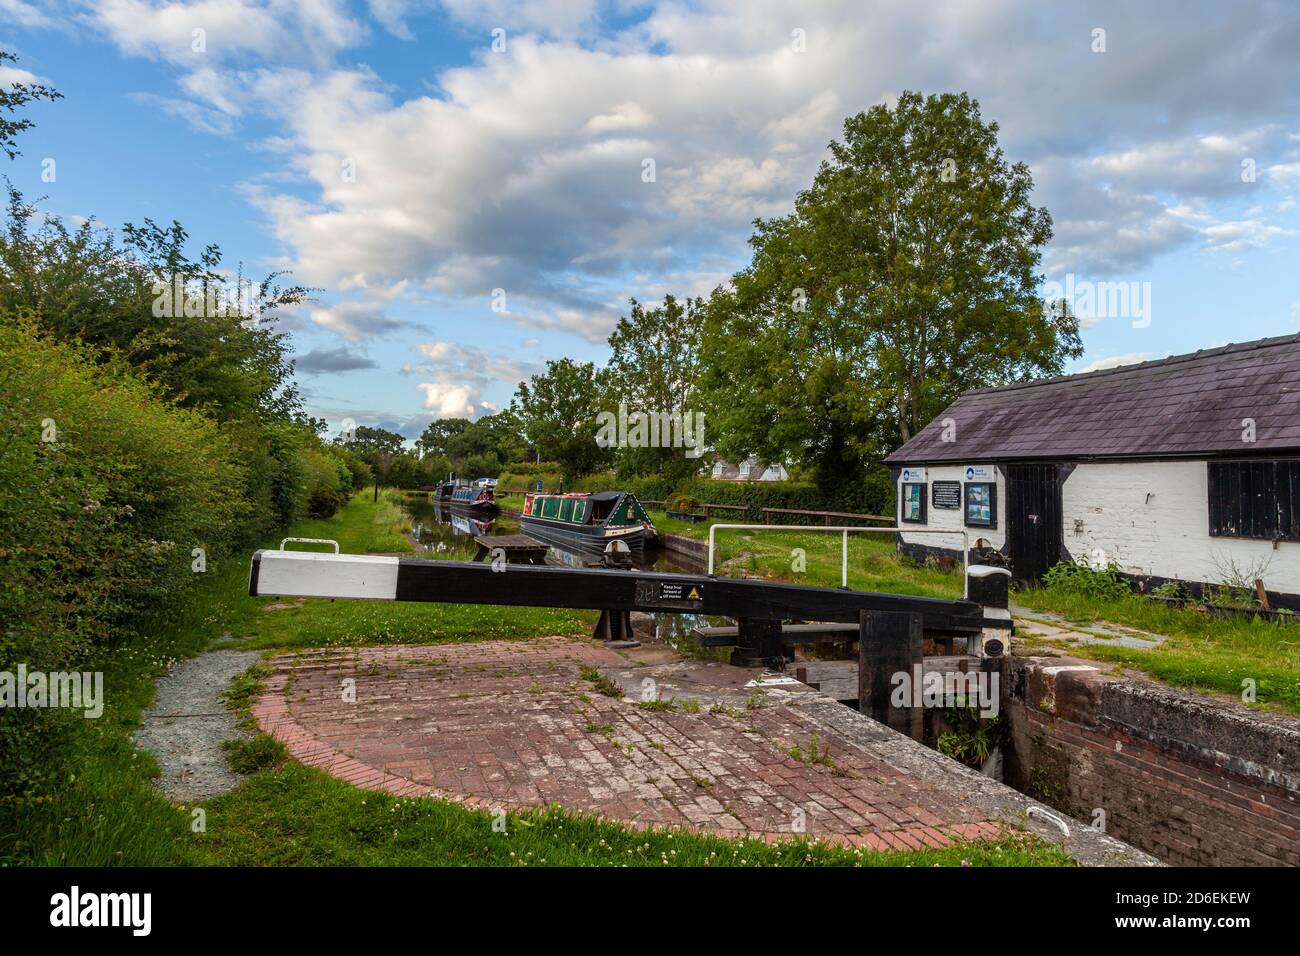 Frankton locks, a lockgate on the Moontgomery canal. This stretch of the canal marks the start of the canal as it diverts from the Llangollen Canal,Sh Stock Photo